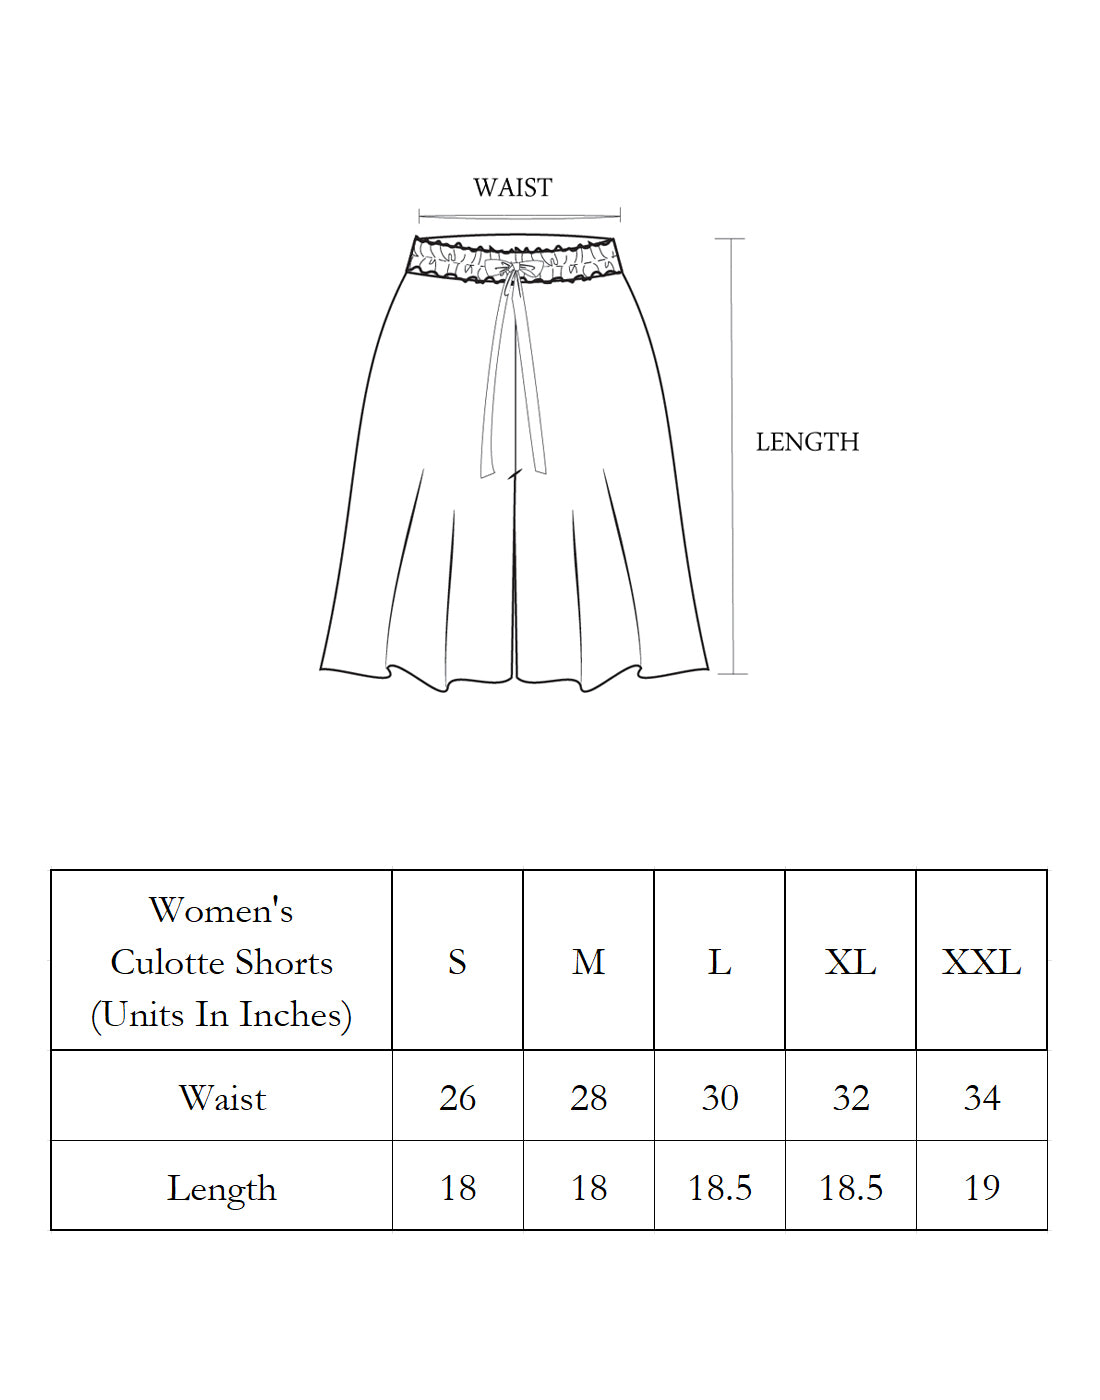 Culottes Shorts for Women-Pink Navy Stripes